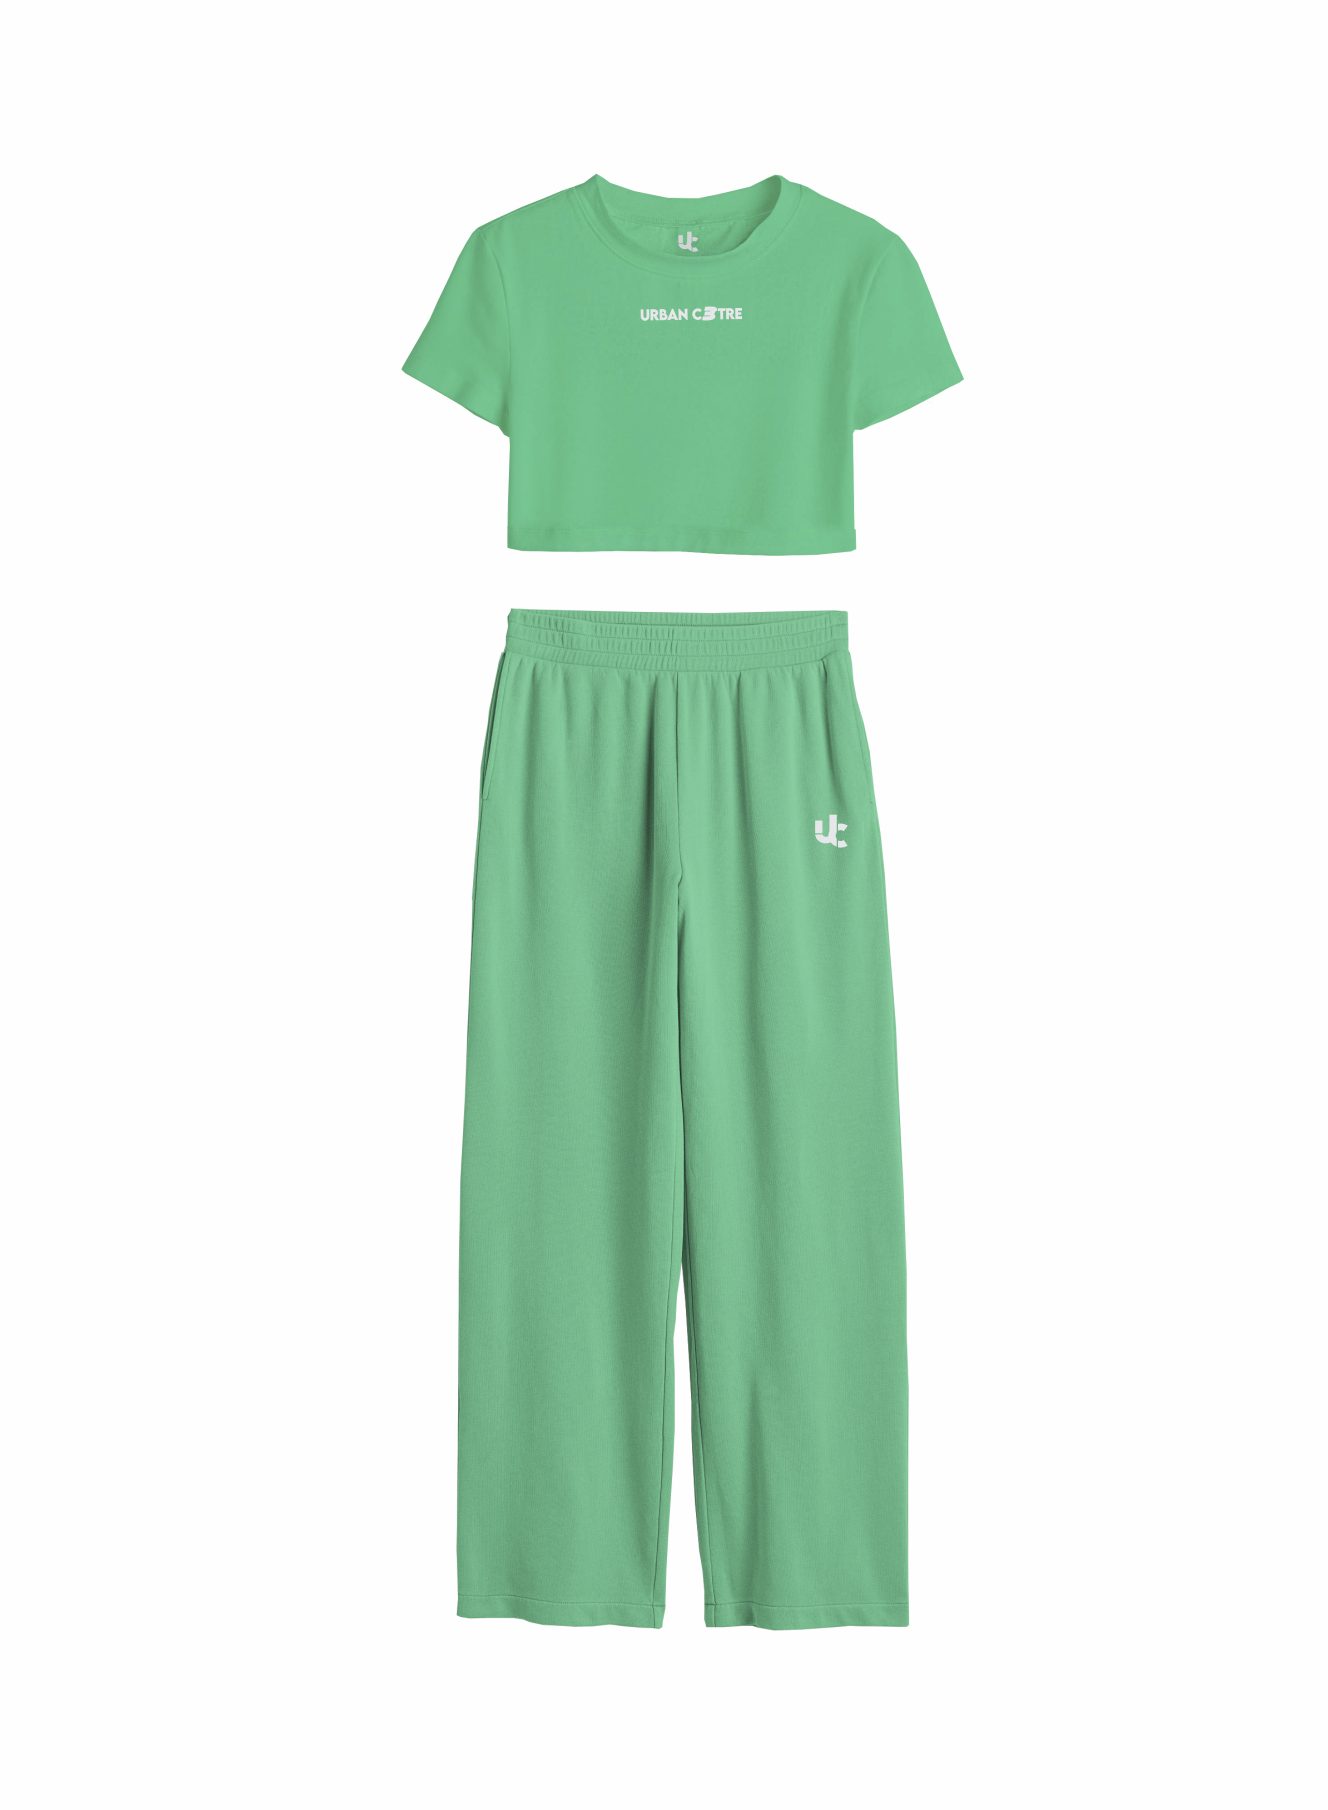 Uc Oversized pant with crop top (Light Green)